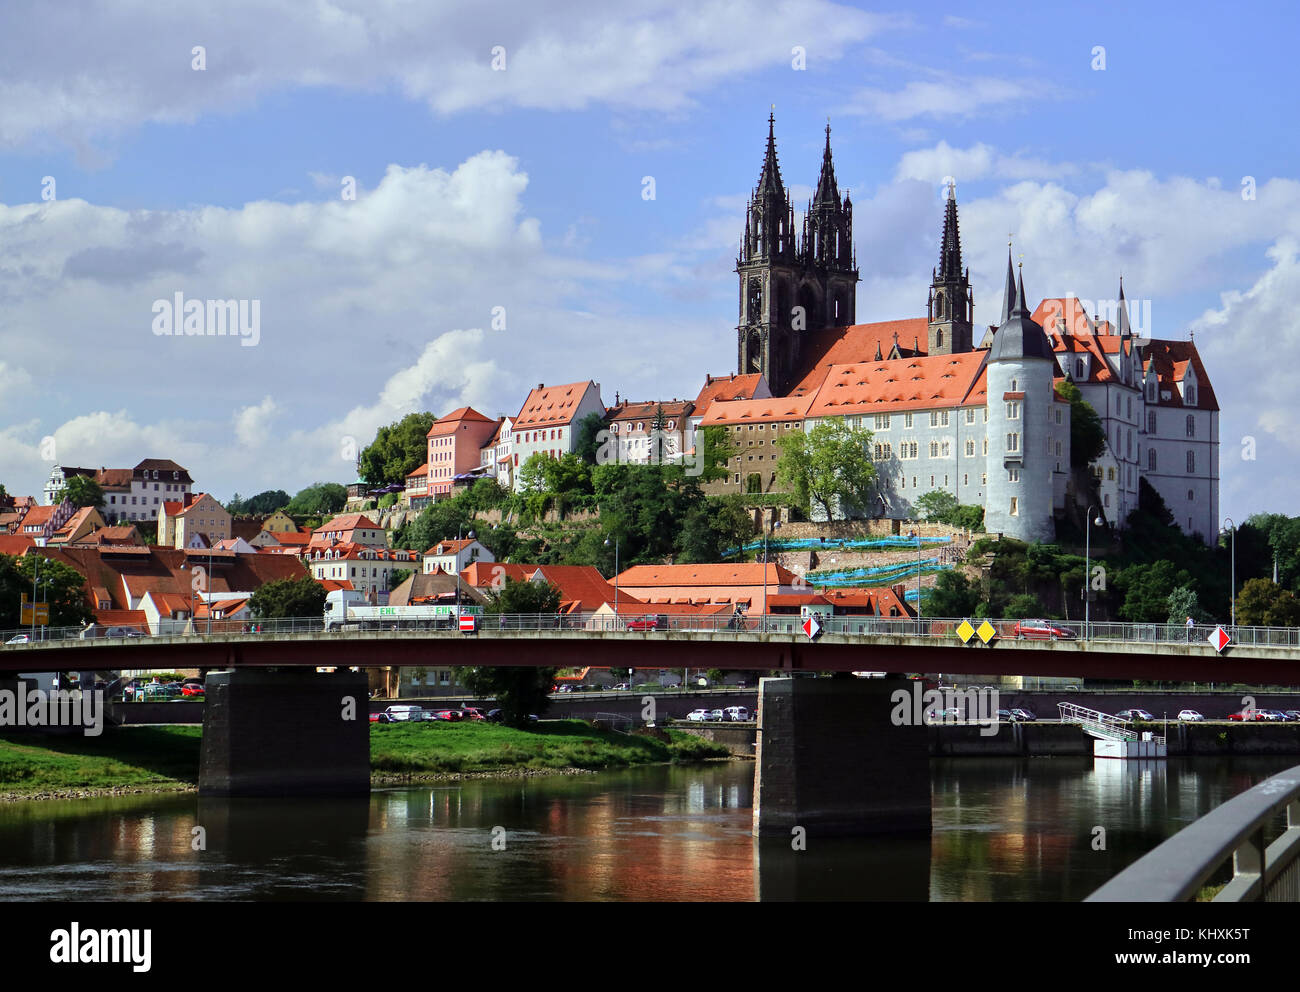 Europe, Germany, Saxony, Meissen, View Of Bridge Over Elbe River;  castle Albrechtsburg ;The Albrechtsburg is a Late Gothic castle that dominates the town centre of Meissen in the German state of Saxony. It stands on a hill above the river Elbe. Stock Photo